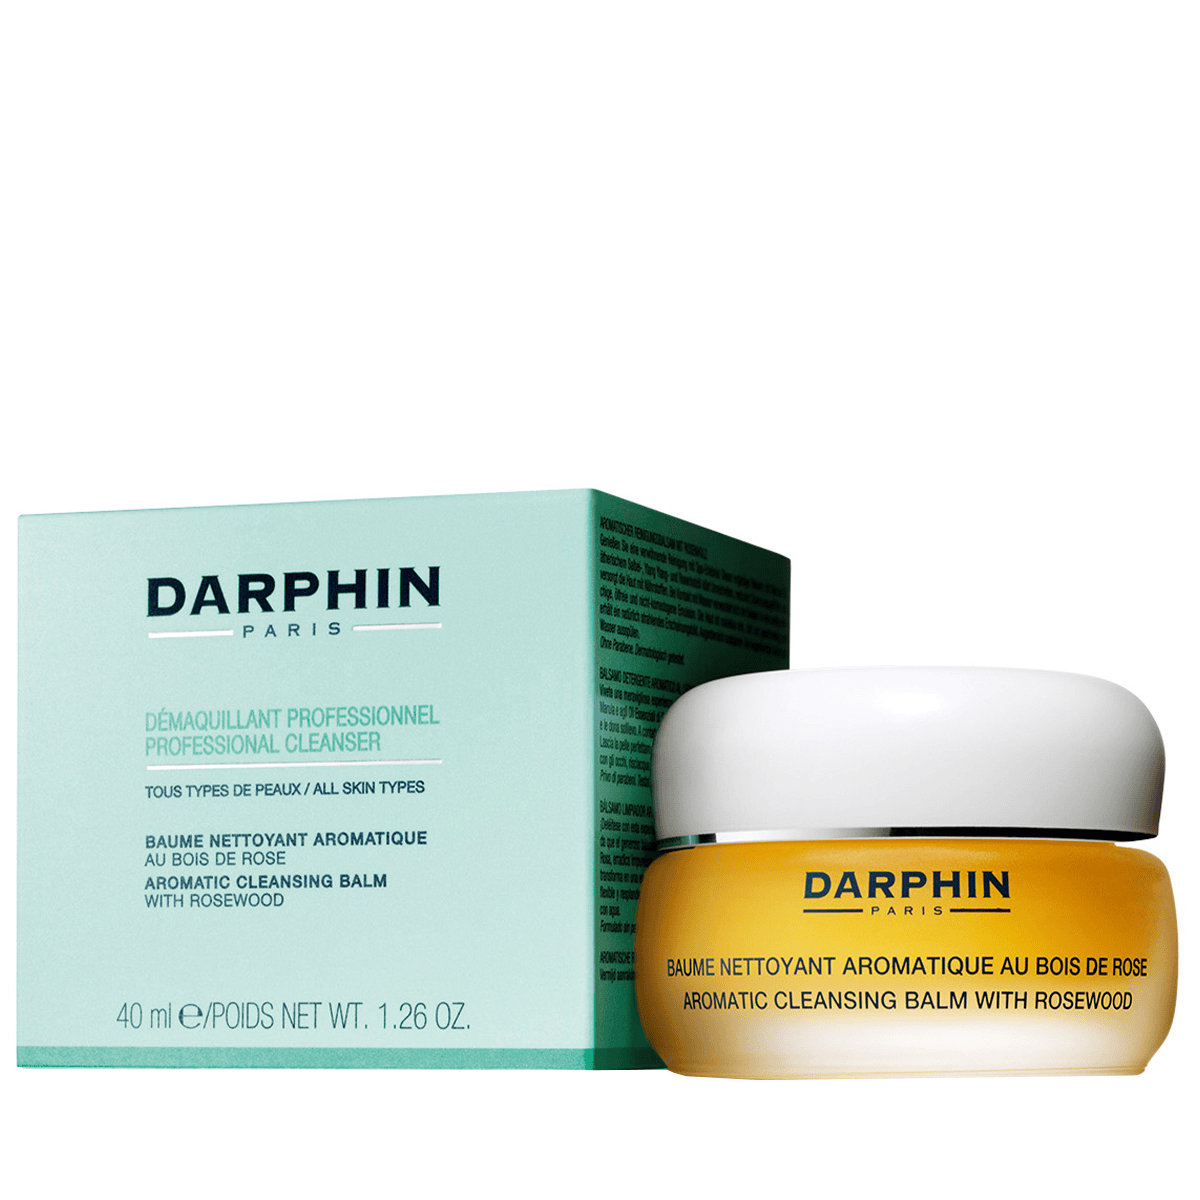 Aromatic Darphin • Balm • Cleansing Rosewood with